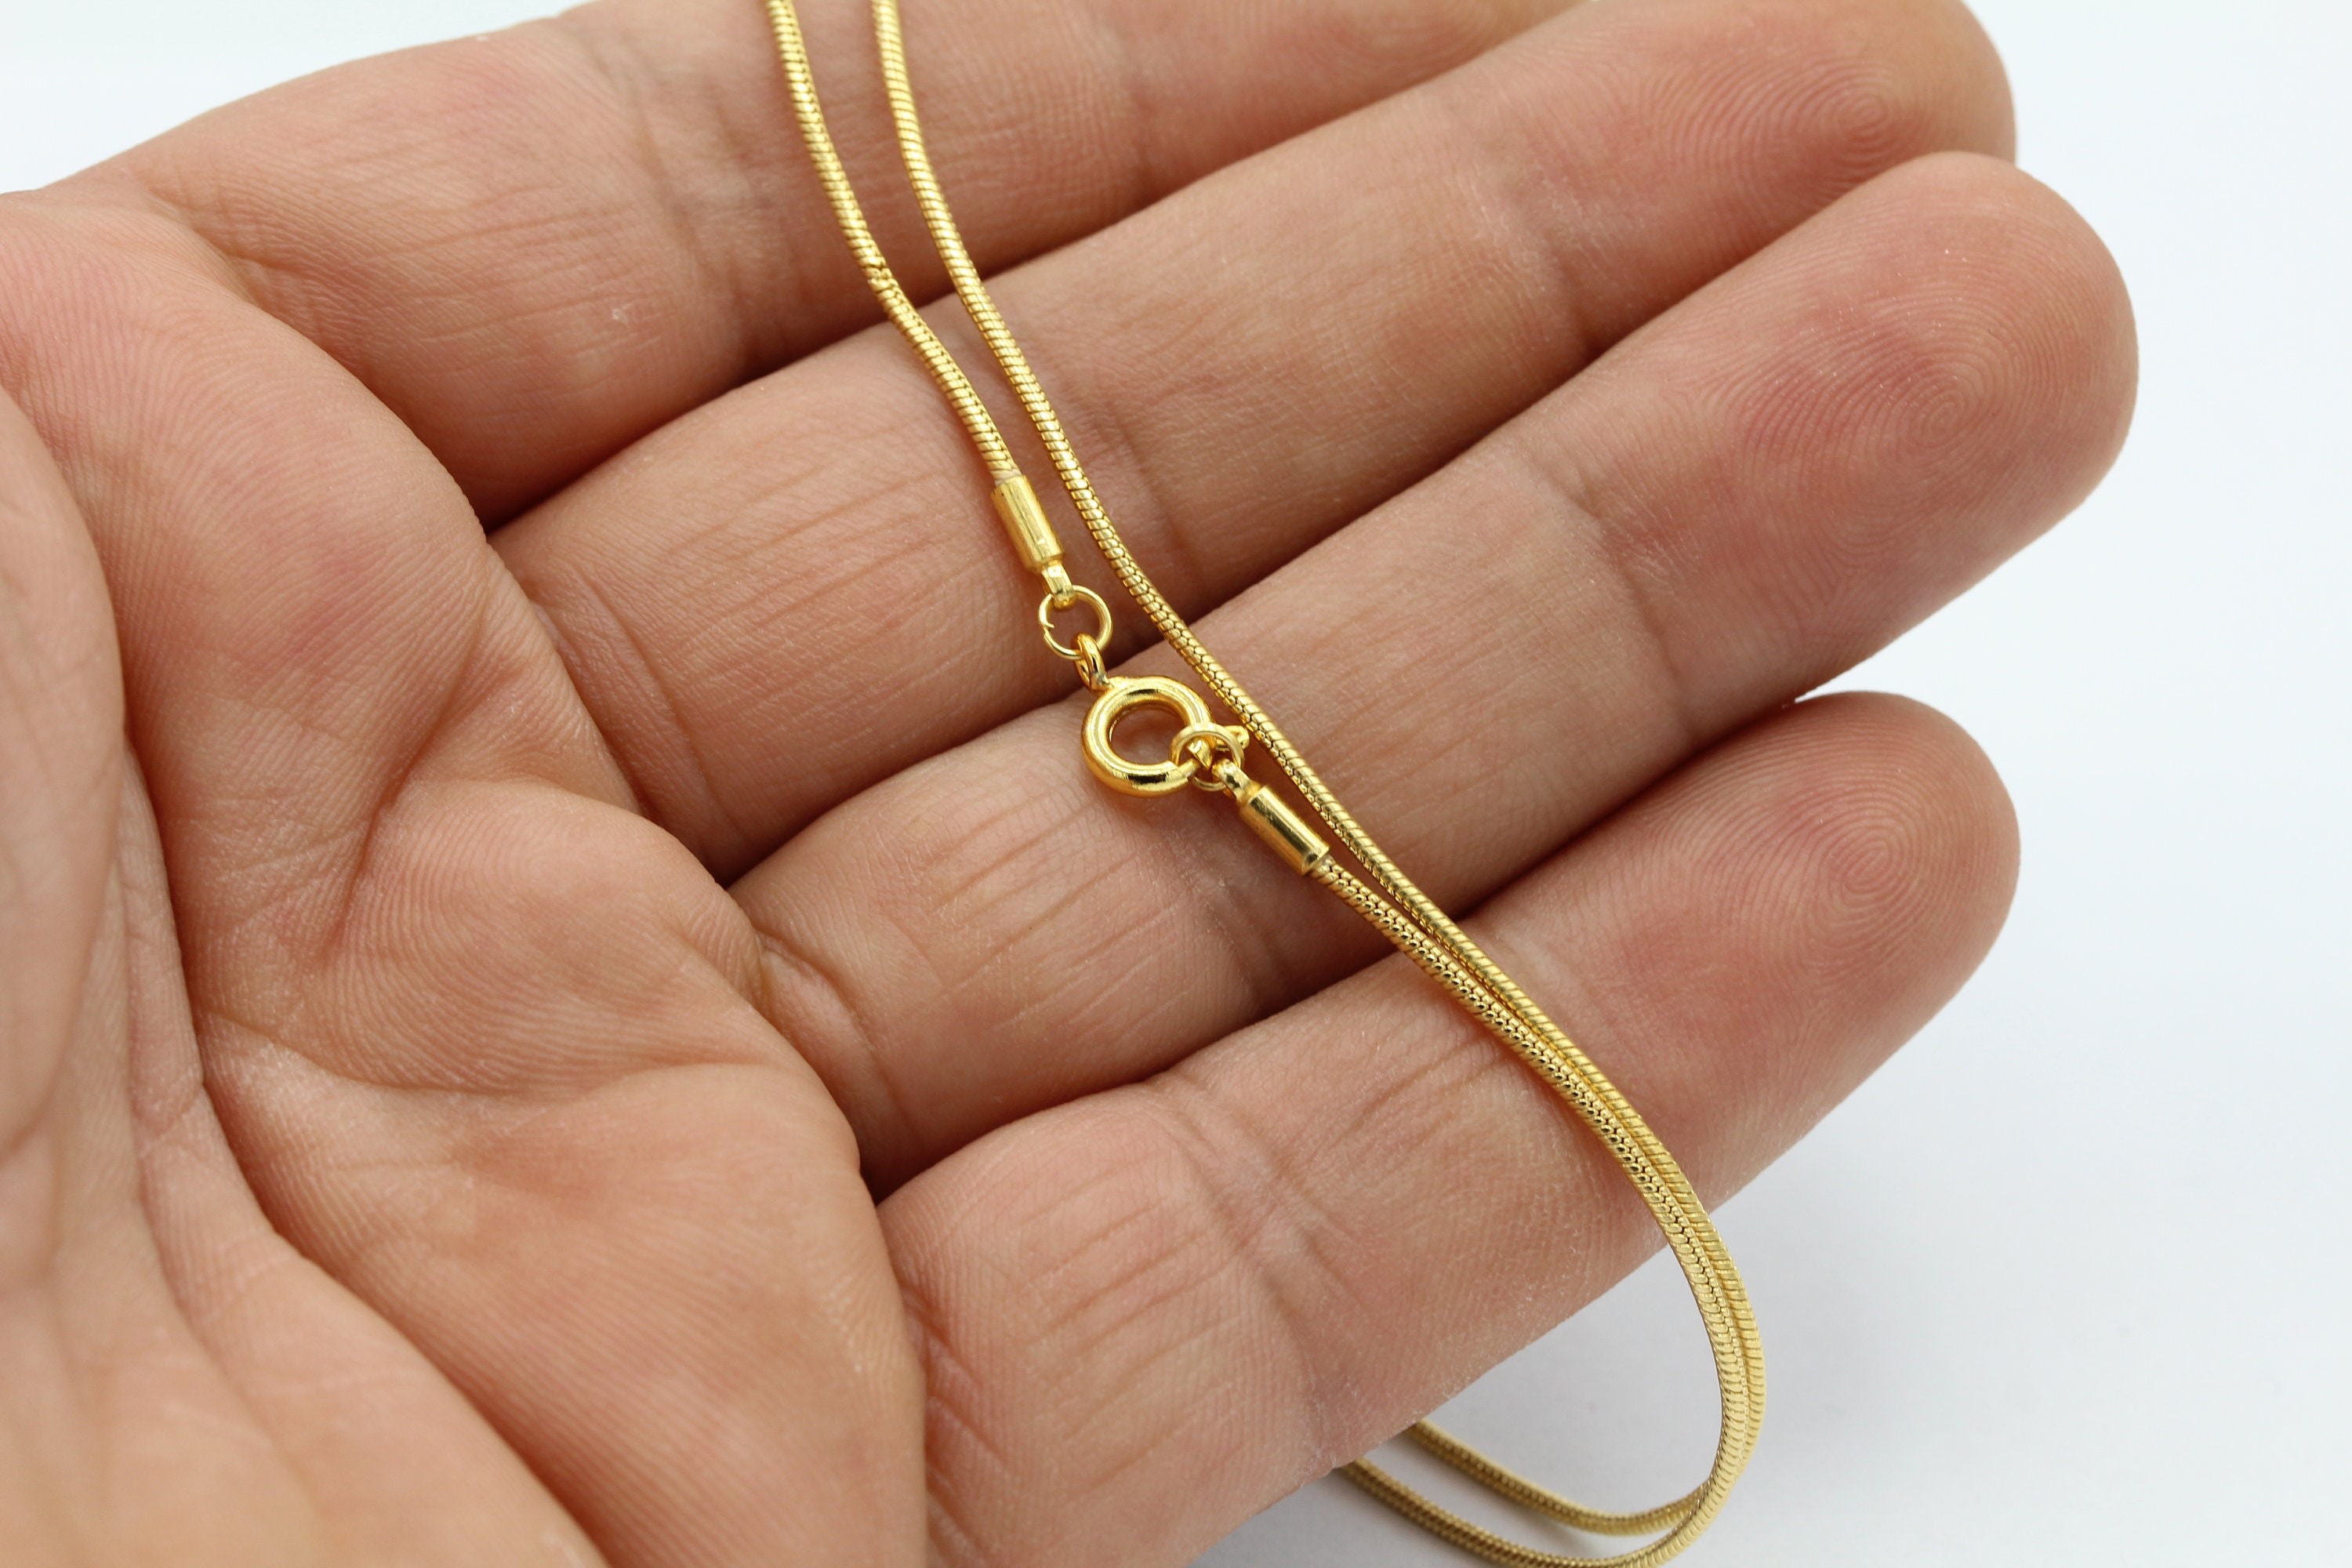 Copper Gold Necklace 24k Gold Chain 70cm Length From Goodfuzecheng